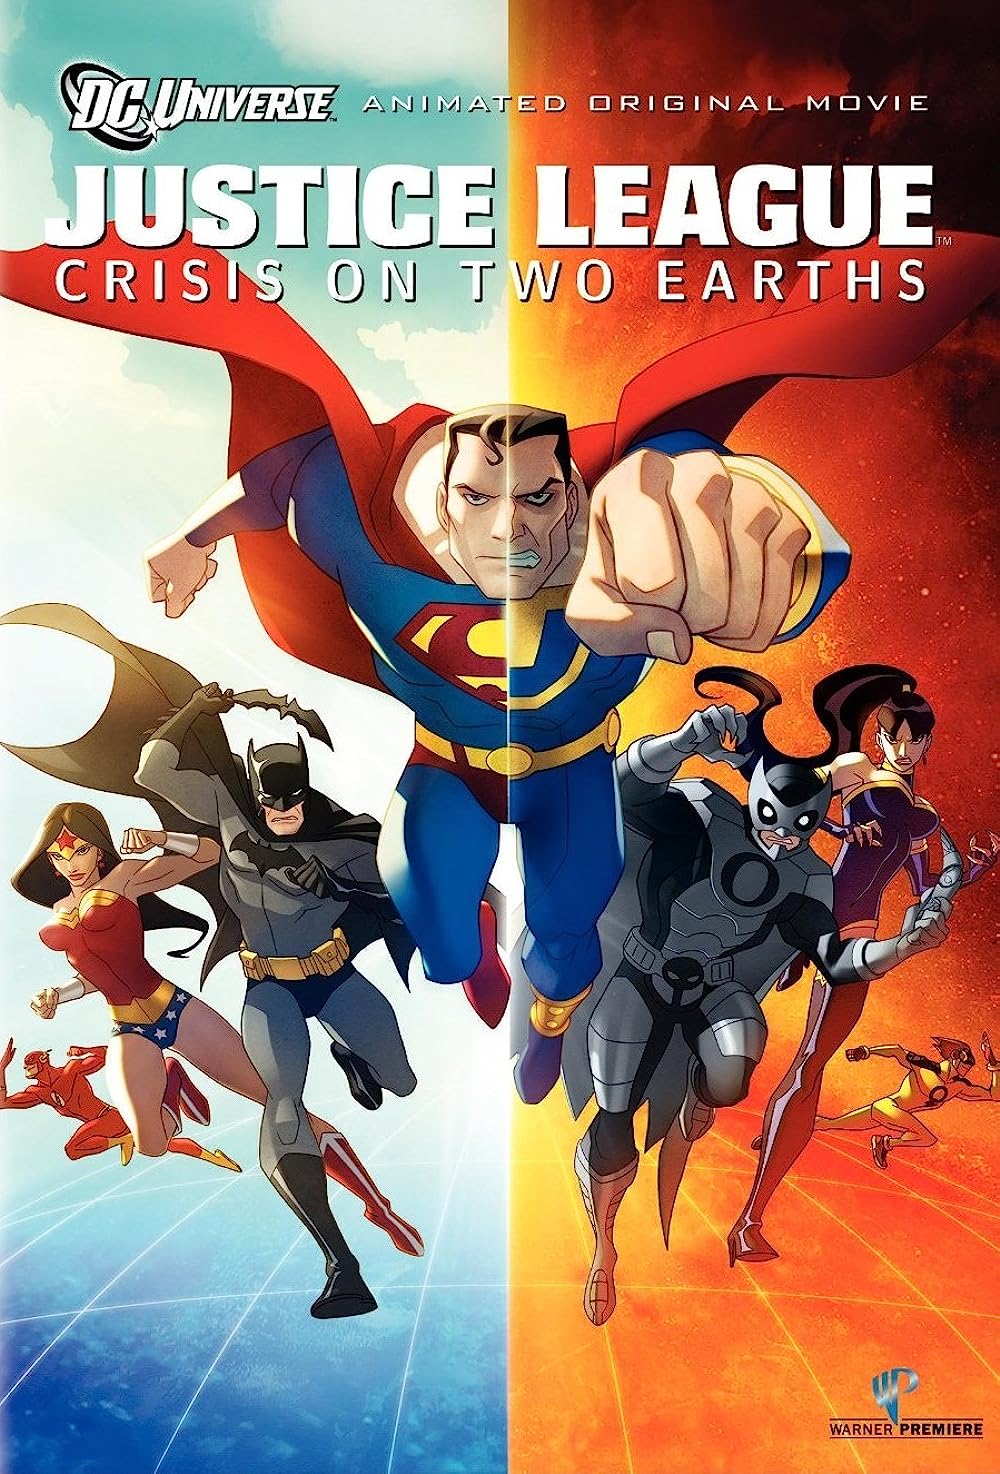 Justice League: Crisis on Two Earths best dc animated movies